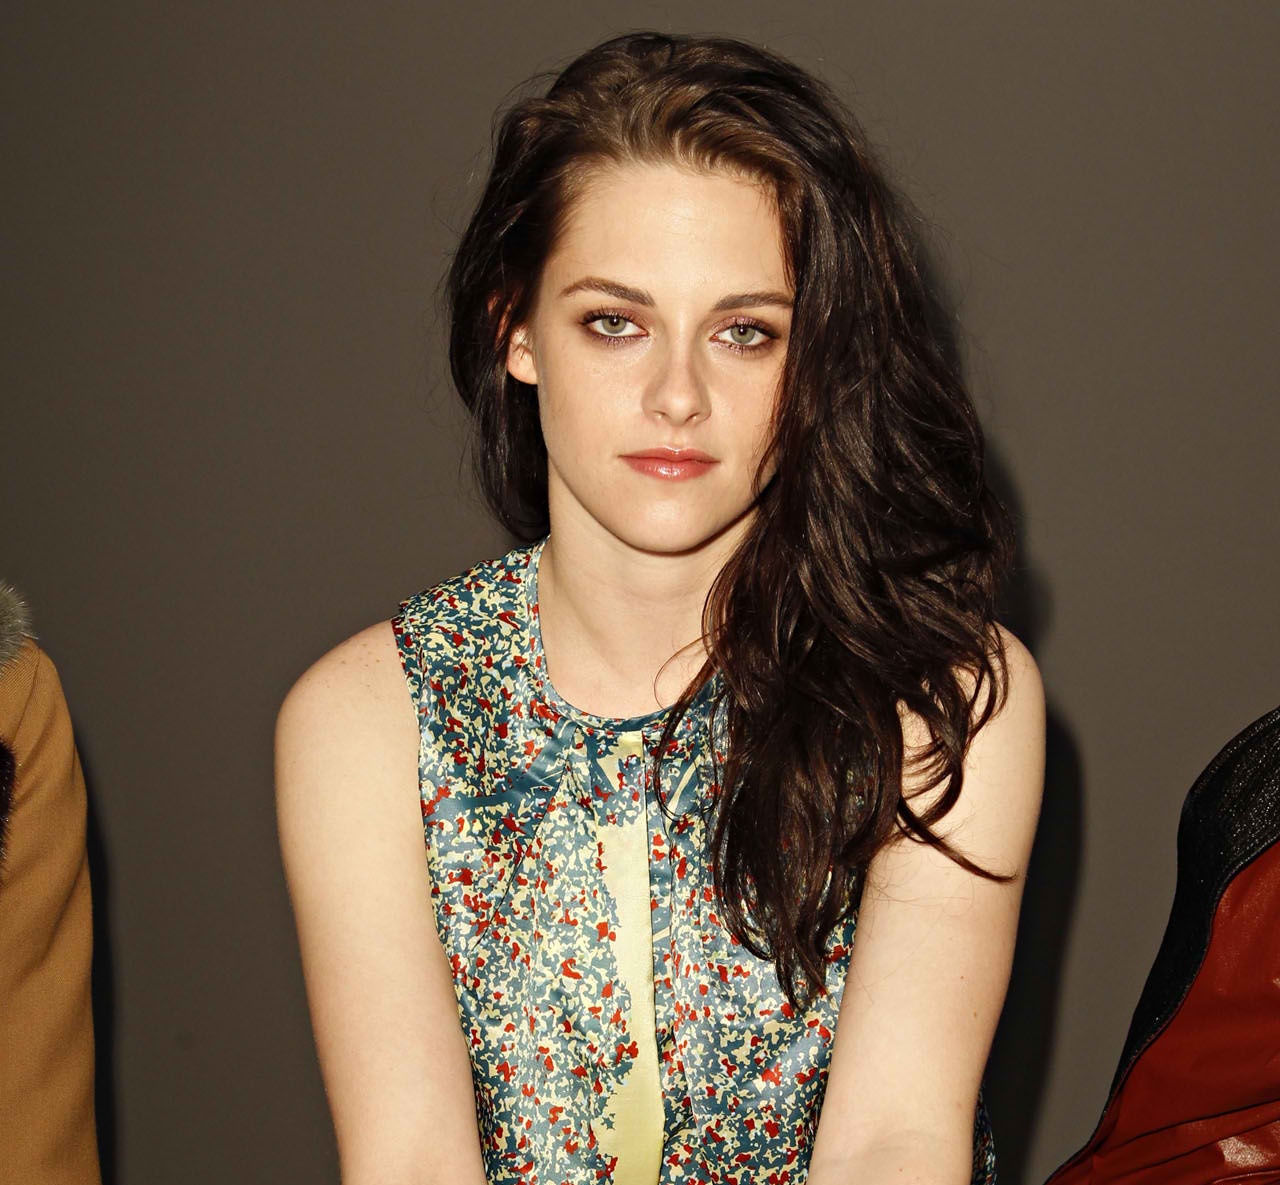 Happy birthday to my whole life, KRISTEN STEWAI LOVE YOU VERY MUCH, she is the best, she is my whole life  . 